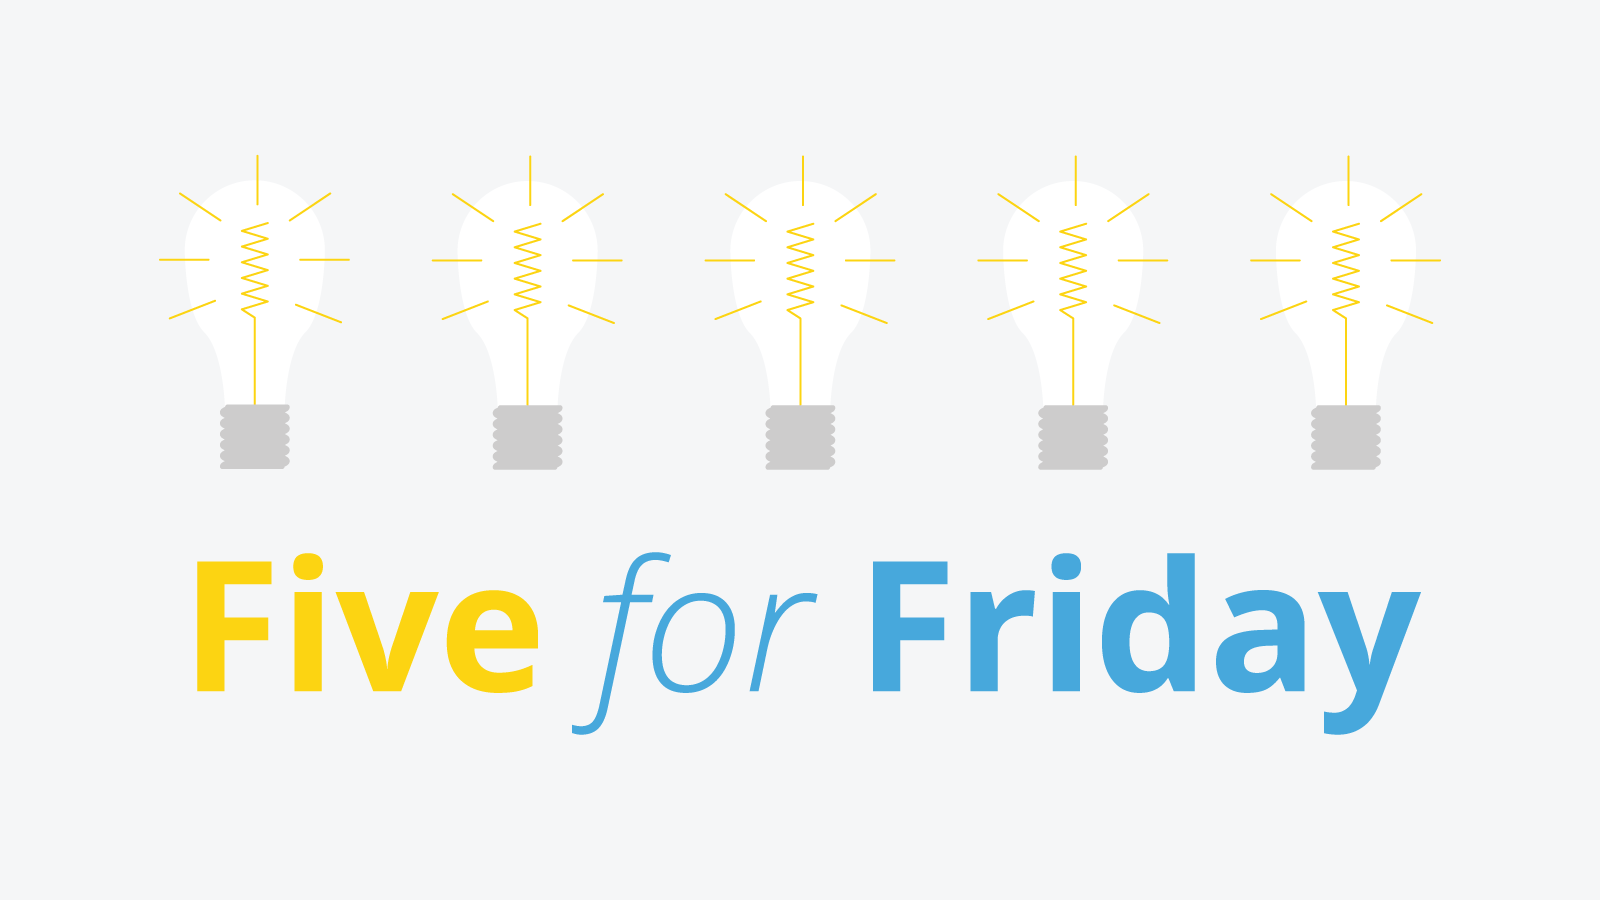 Five for Friday: The future of work